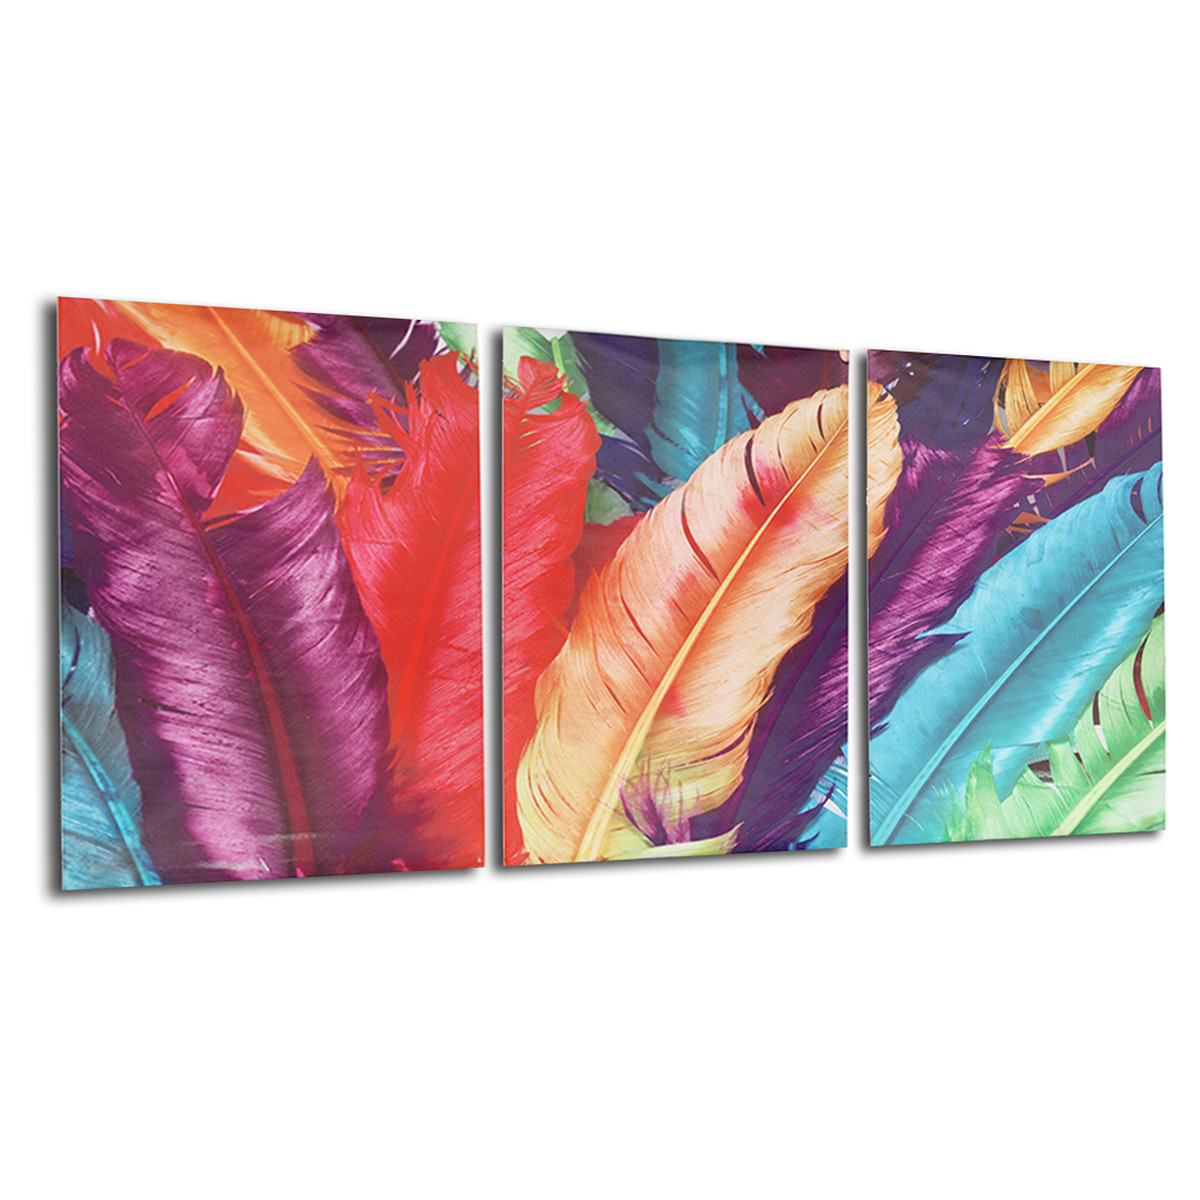 3-Cascade-Huge-Modern-Abstract-Canvas-Painting-Decorative-Wall-Picture-Home-Decoration-Unframed-1117200